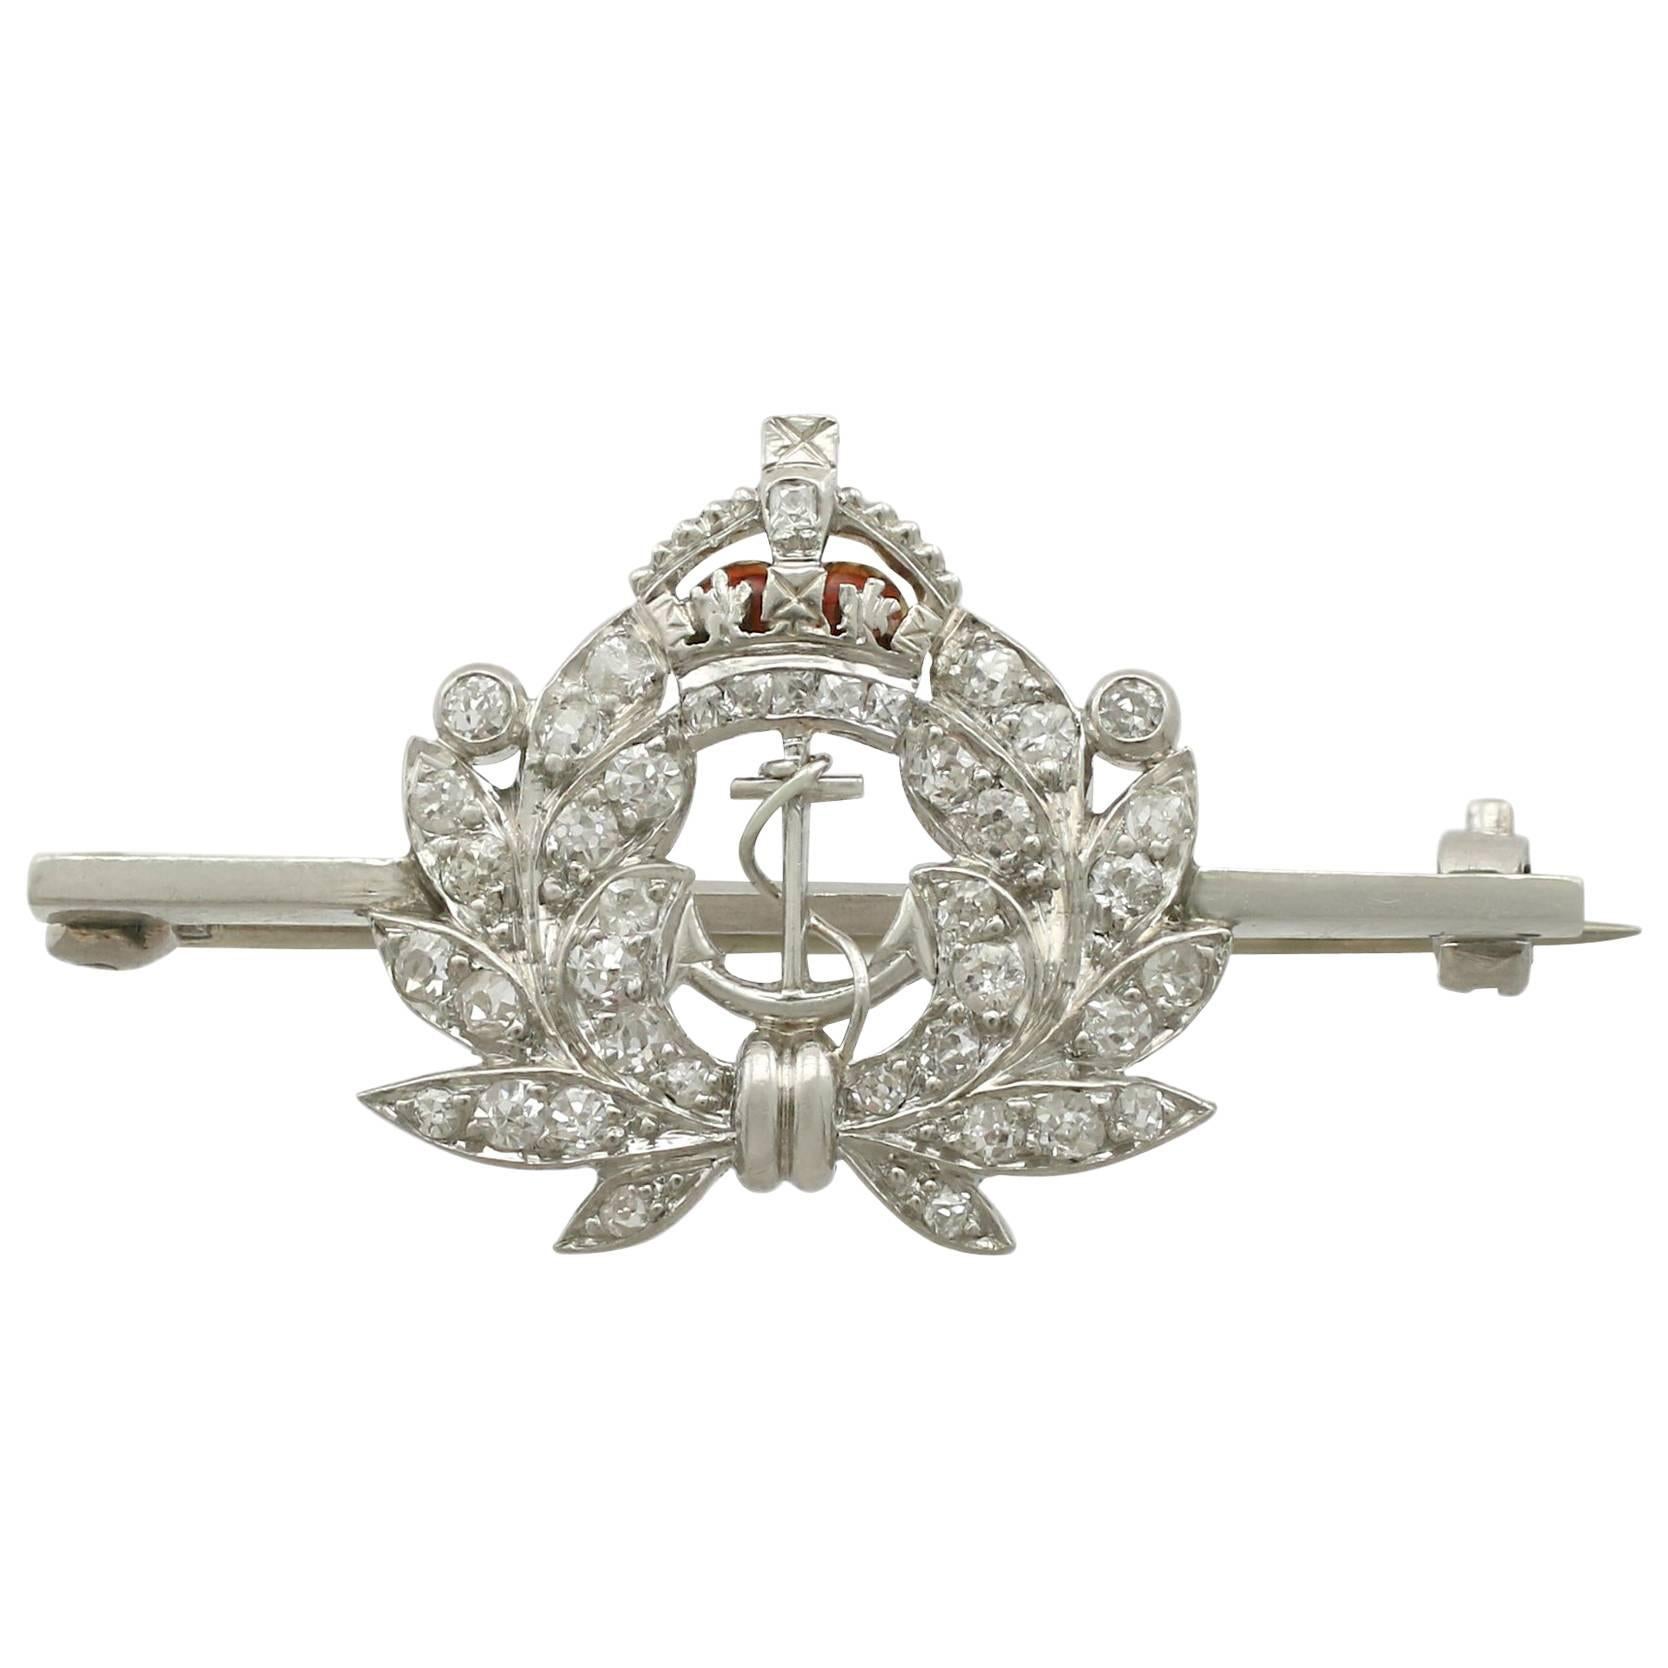 Antique Diamond and White Gold Royal Navy Brooch